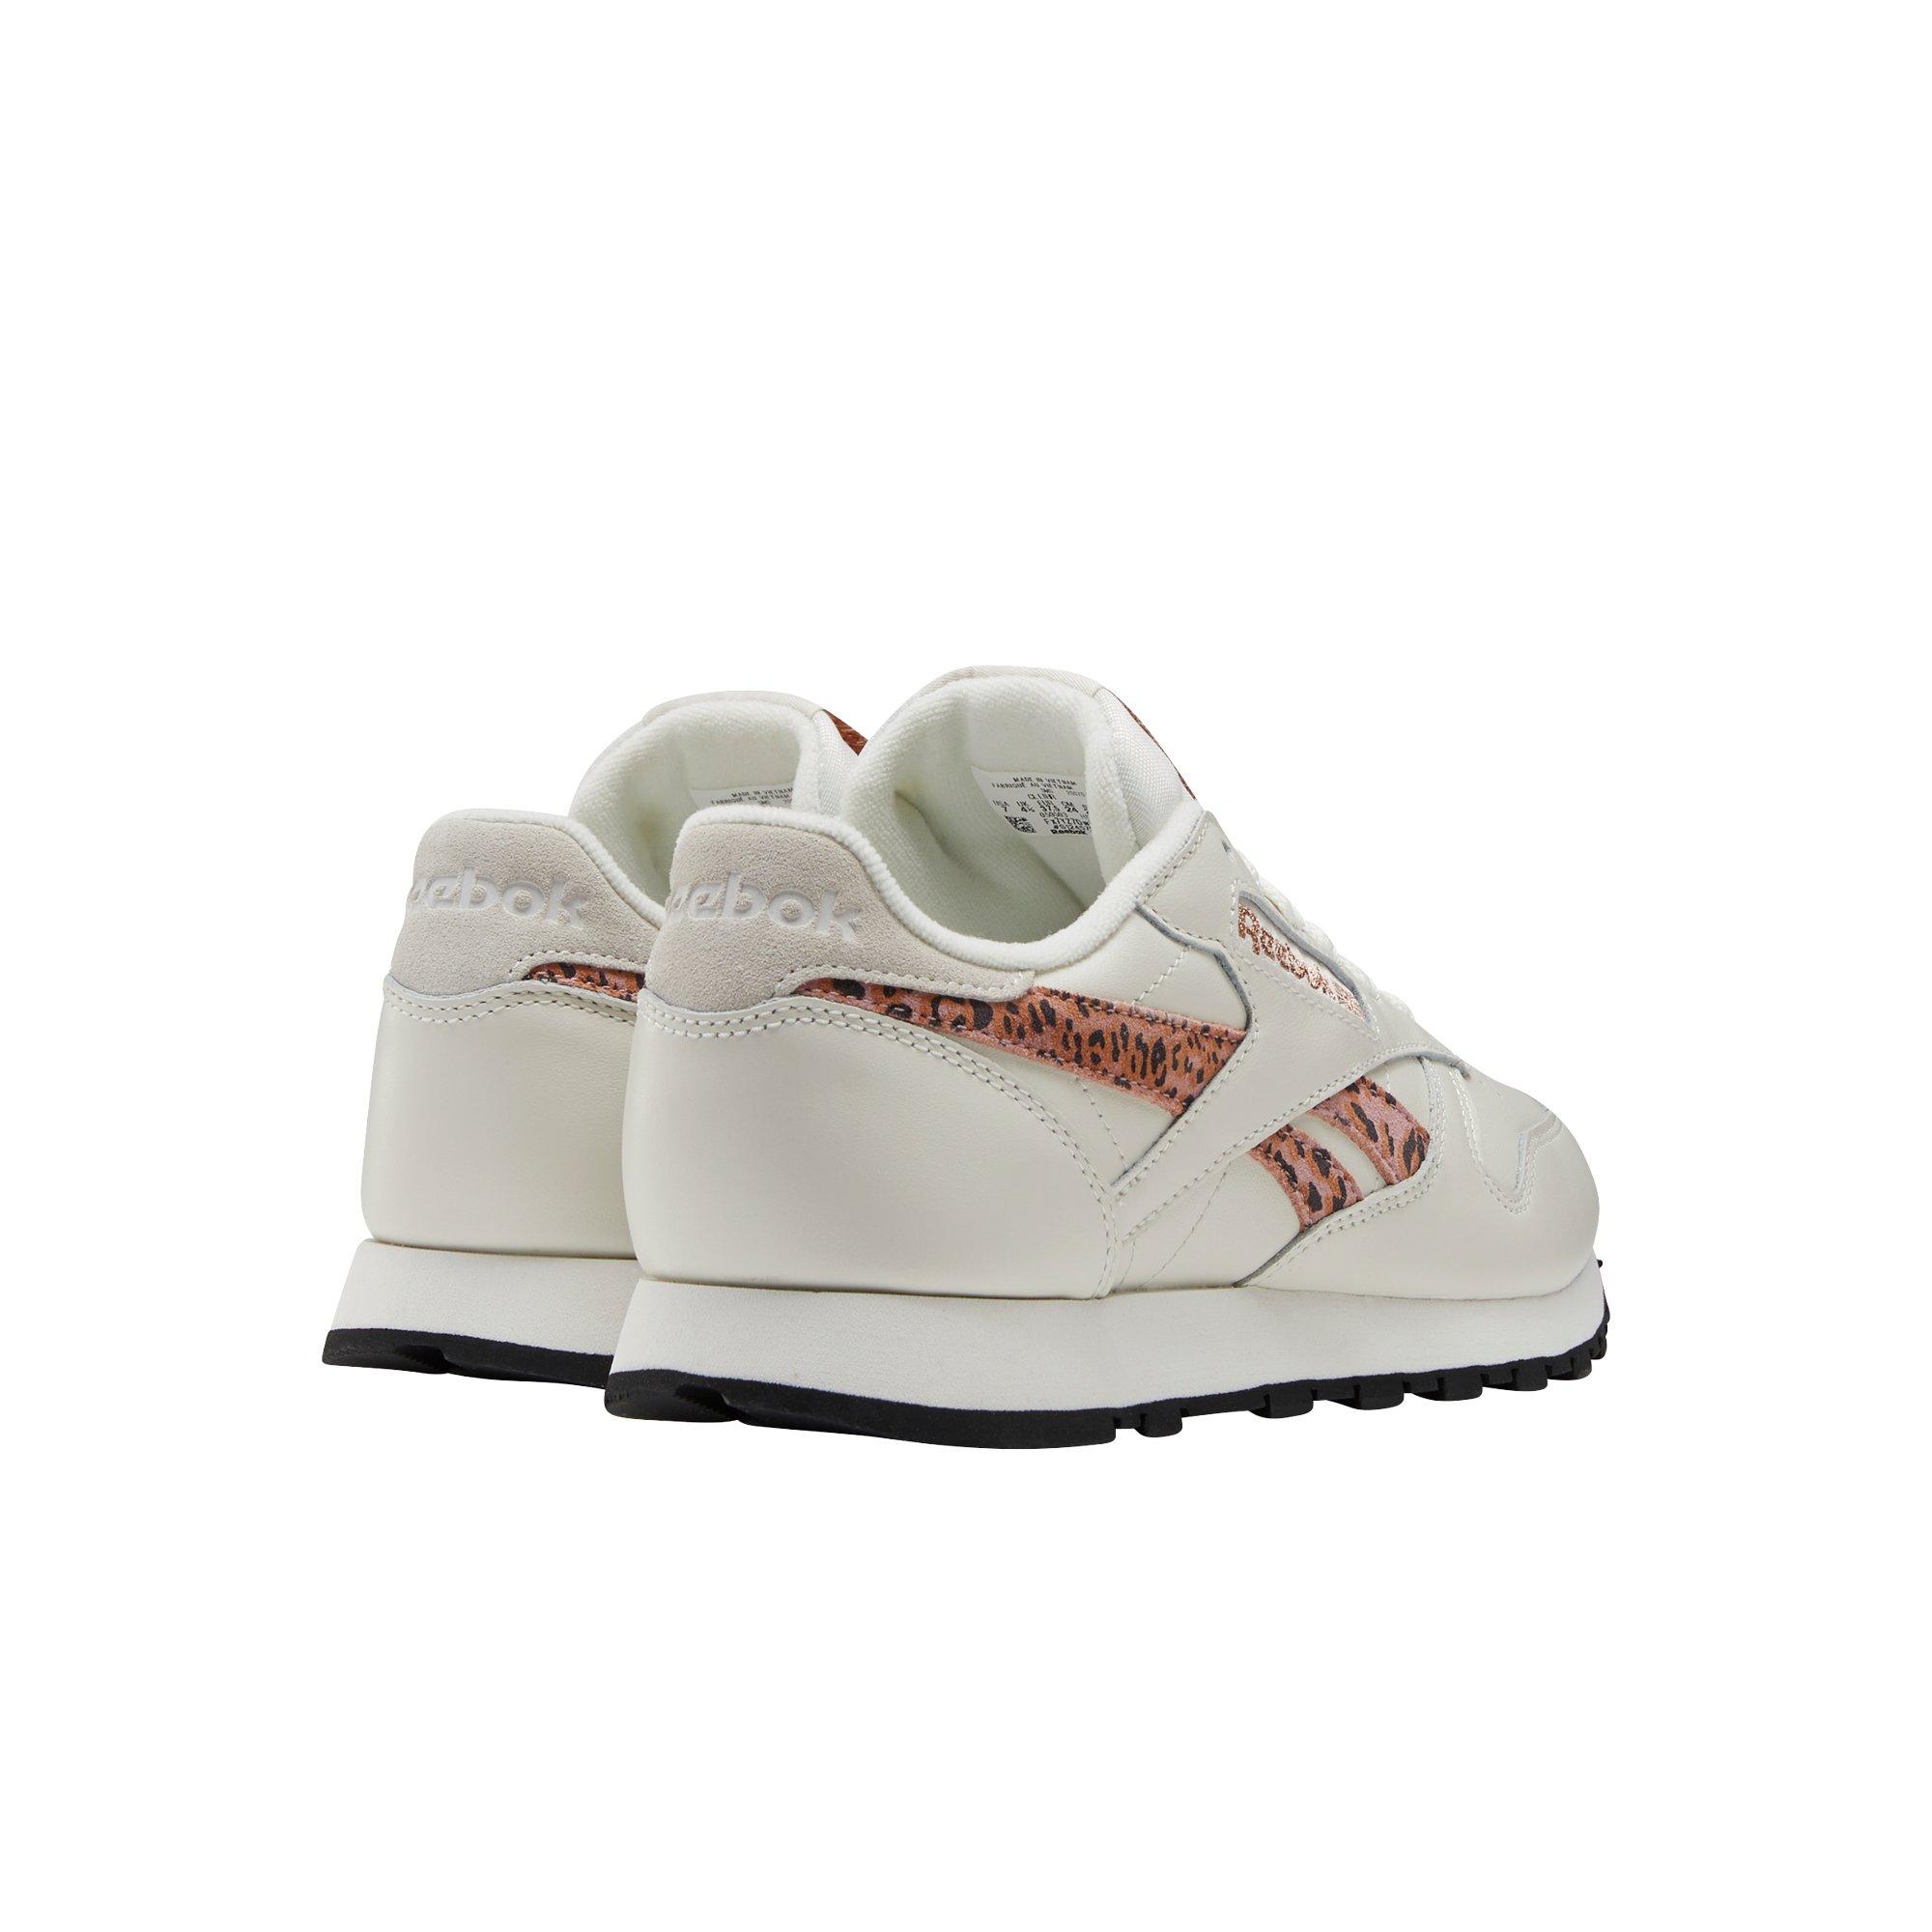 Overcome Successful Sophisticated Reebok Classic Leather "White/Rose Gold" Women's Shoe - Hibbett | City Gear